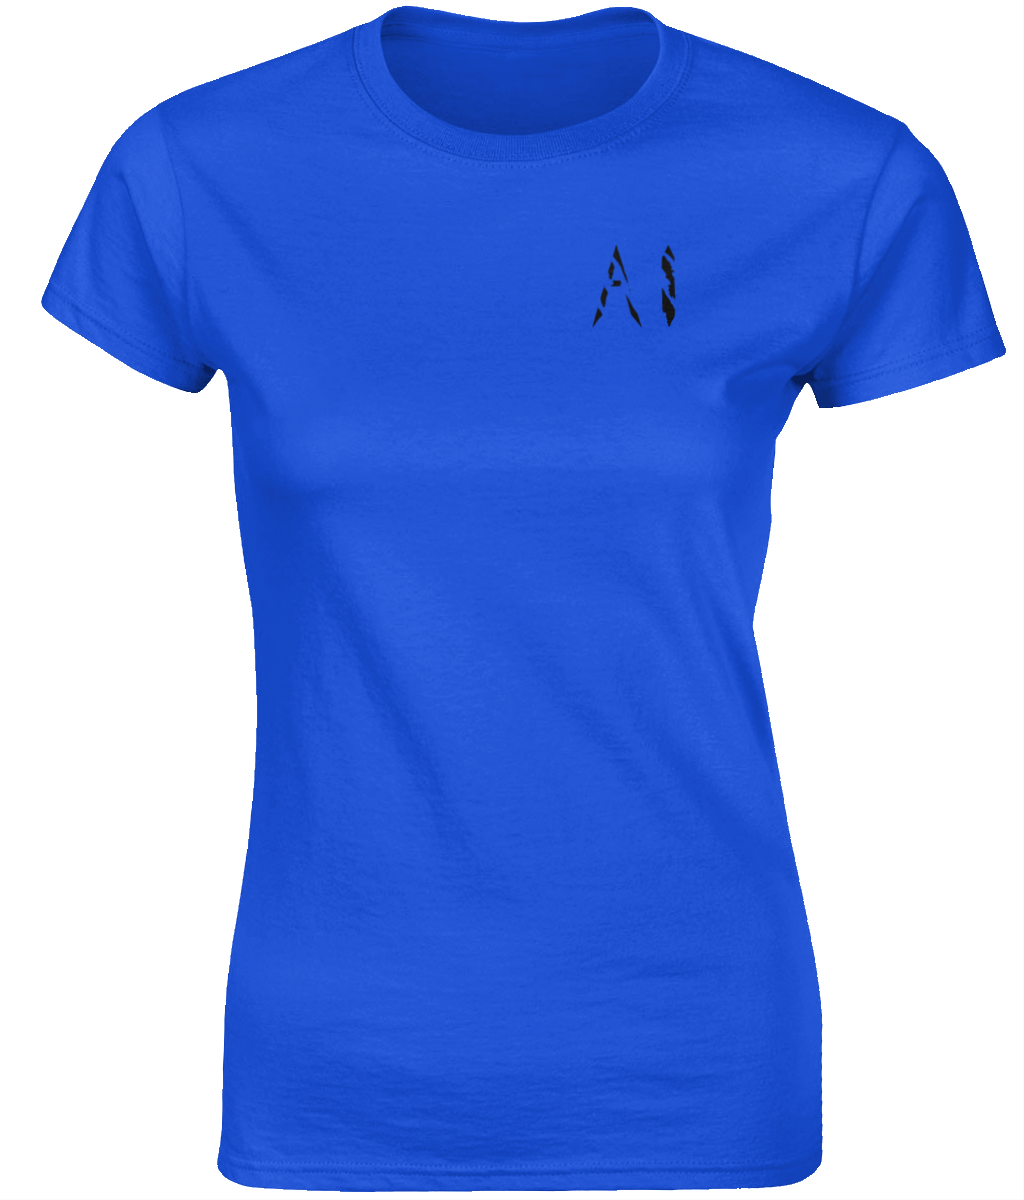 Womens blue Fitted Ringspun T-Shirt with black AI logo on left breast